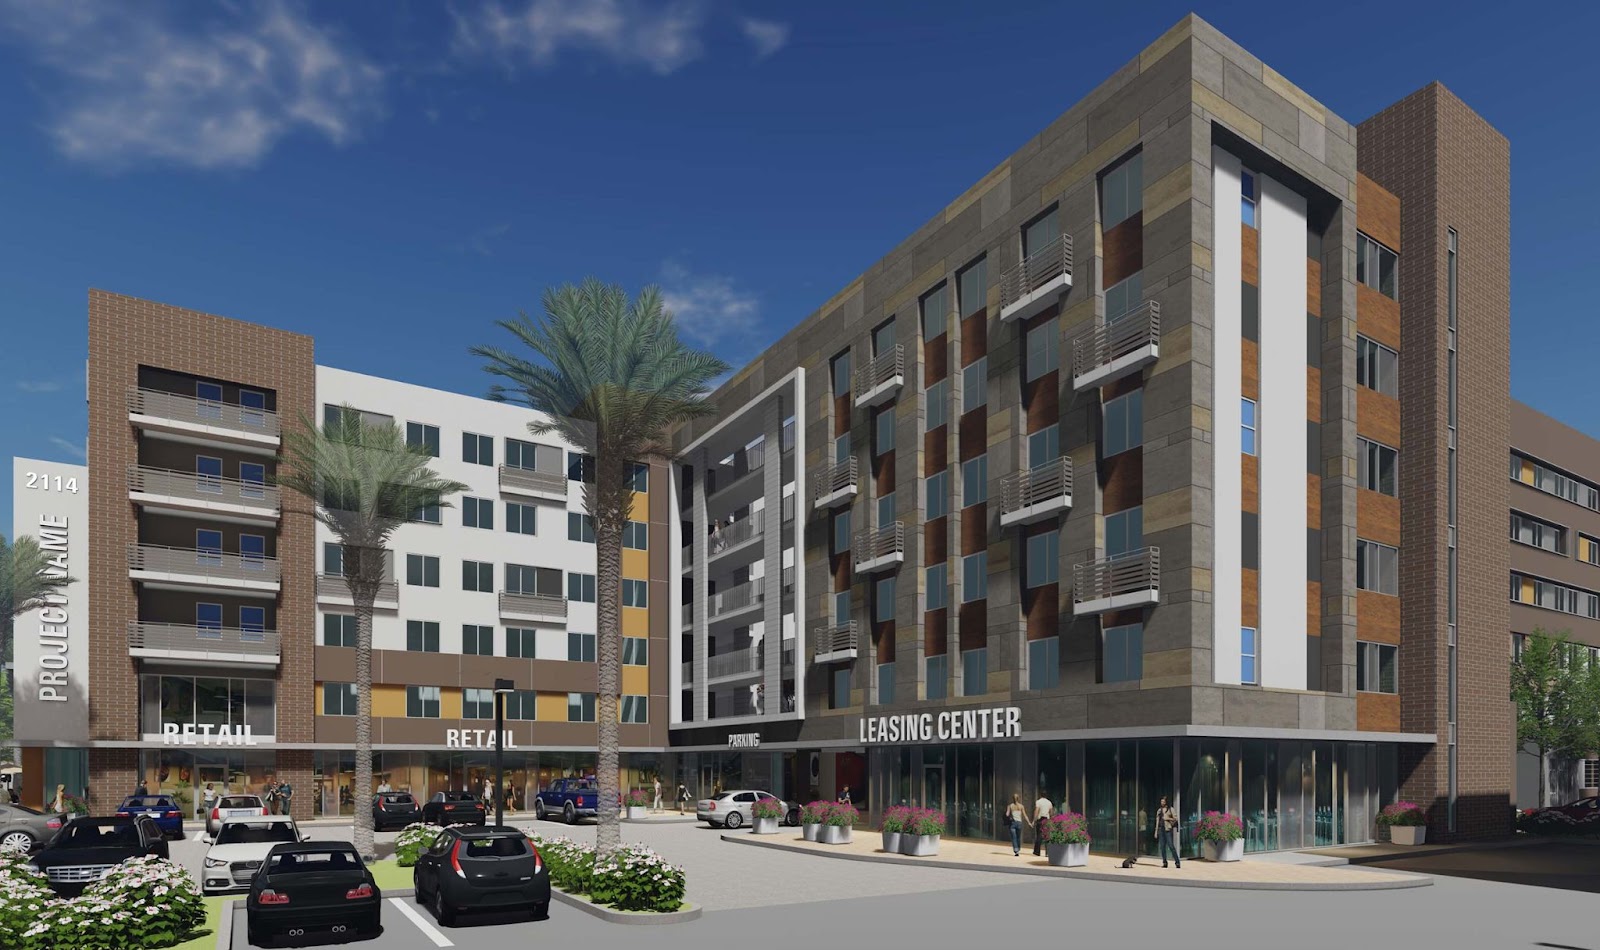 A computer rendering of a new apartment building. There are two palm trees and a few vehicles in the parking lot in the foreground. The building appears to be backwards-L shaped, with the top coming towards the viewer from the right. There are multiple textures on the building, some areas are painted white or yellow, some seem to be almost like wood floor and some seem to be brick. The bottom floor is commercial space, it has the word "RETAIL" in three places along the overhang on the first floor, as well as a LEASING CENTER on the right.